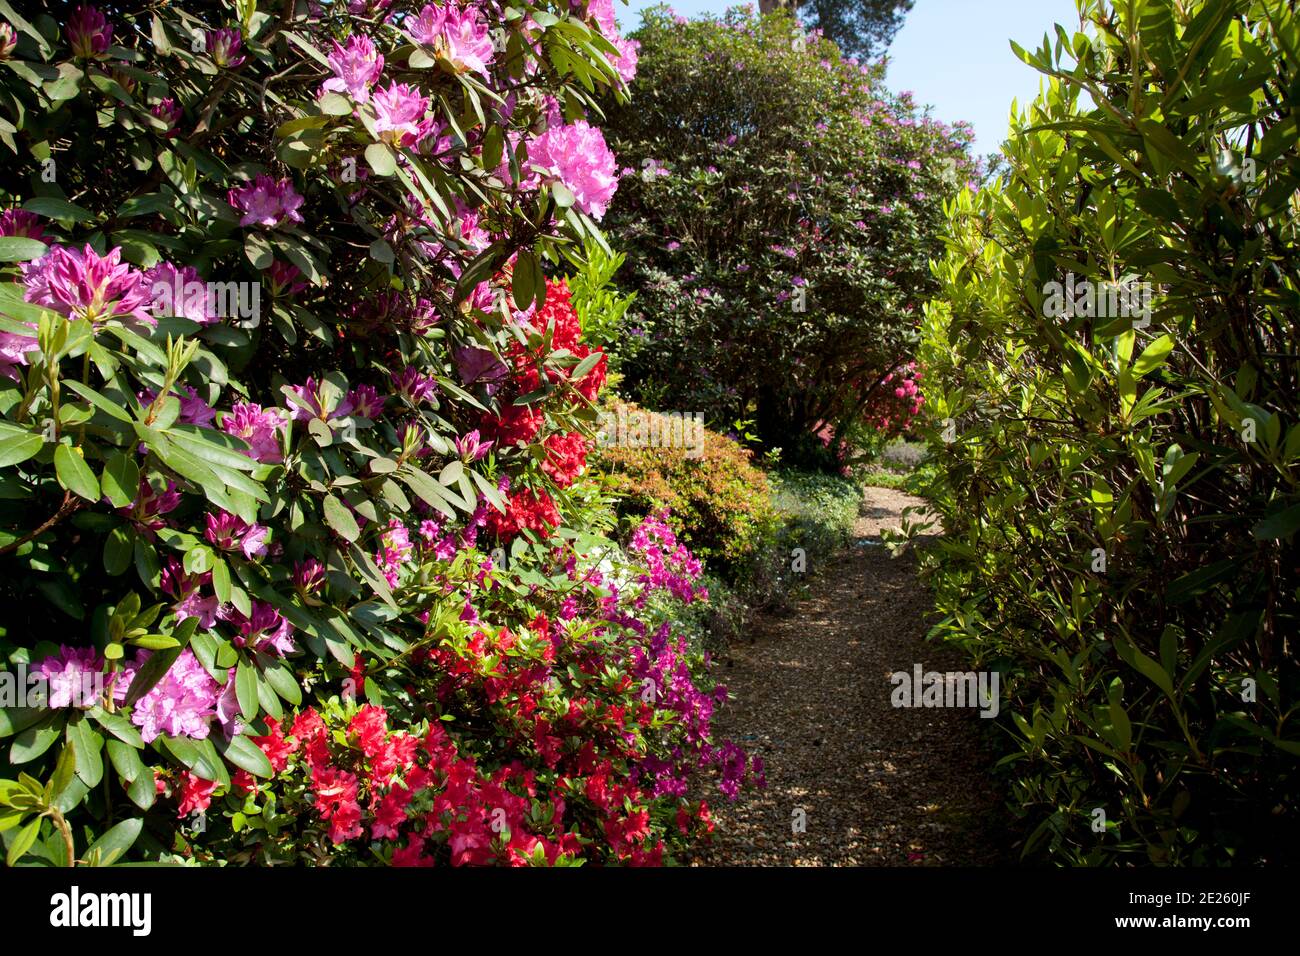 Red and pink azaleas and rhododendrons beside garden path in mature garden Stock Photo